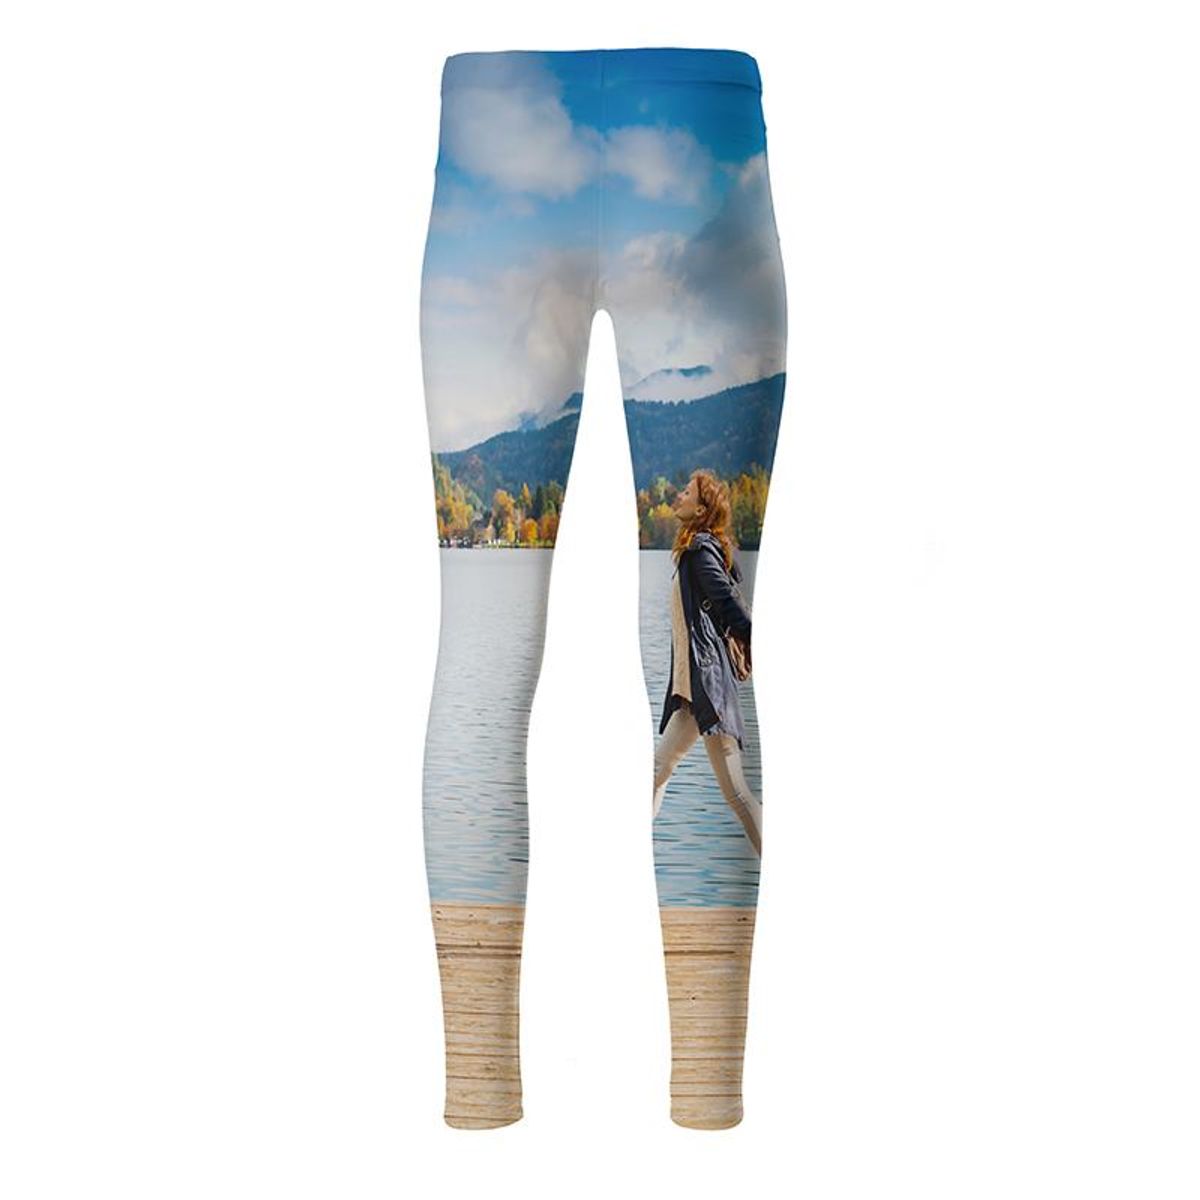 https://raven.contrado.app/resources/images/2018-6/91329/womens-printed-leggings-with-photo-print-311644_l.jpg?w=1200&h=1200&q=80&auto=format&fit=crop